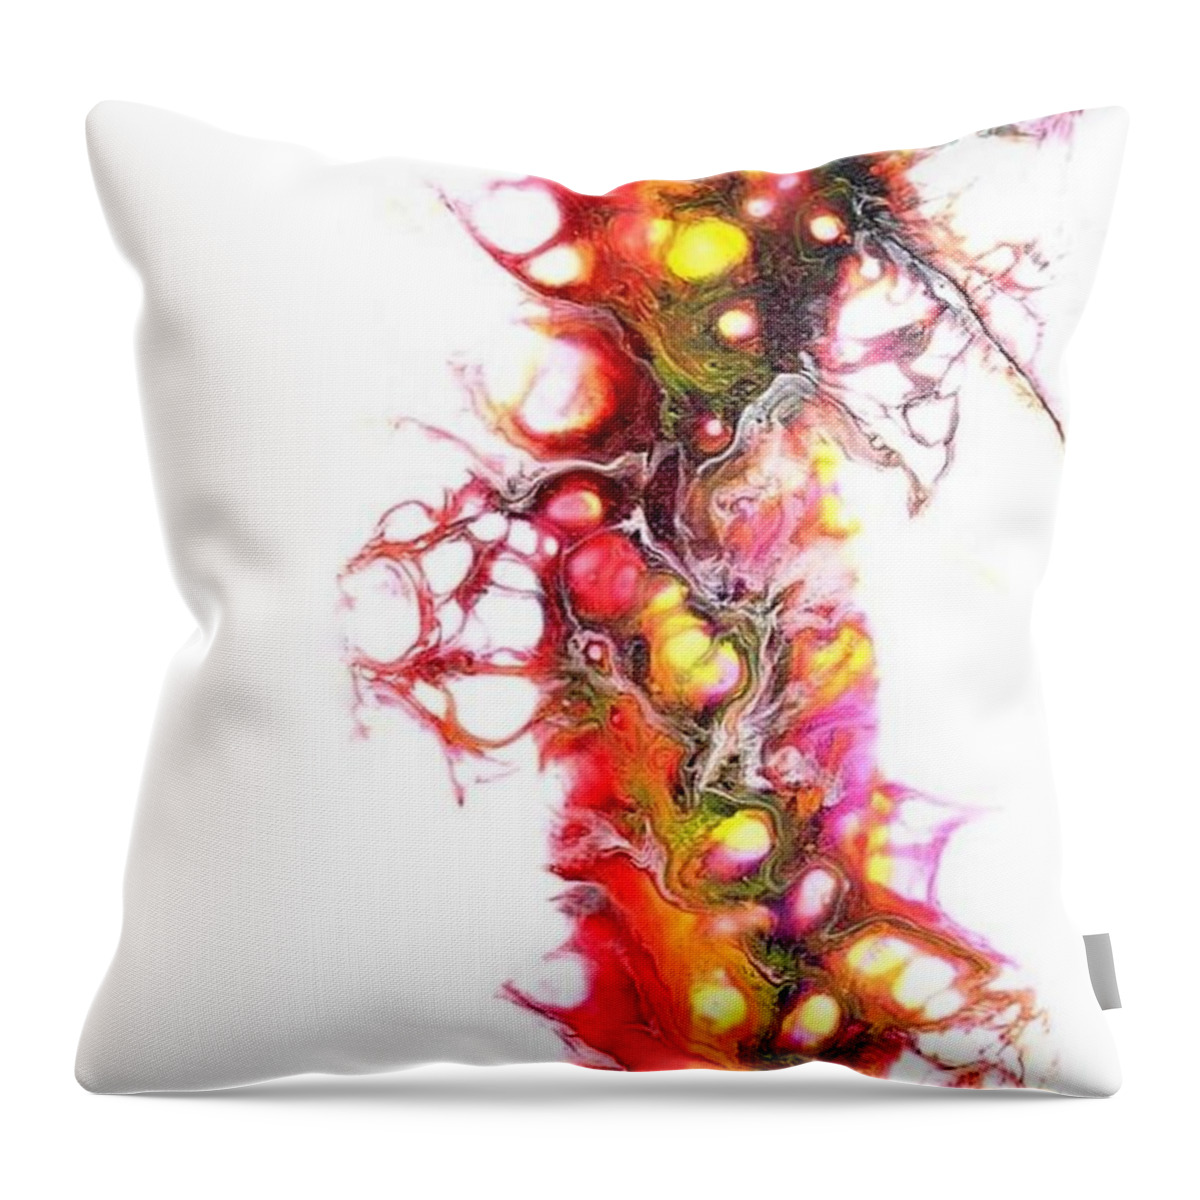 Acrylic Throw Pillow featuring the painting Ignition by Daniela Easter